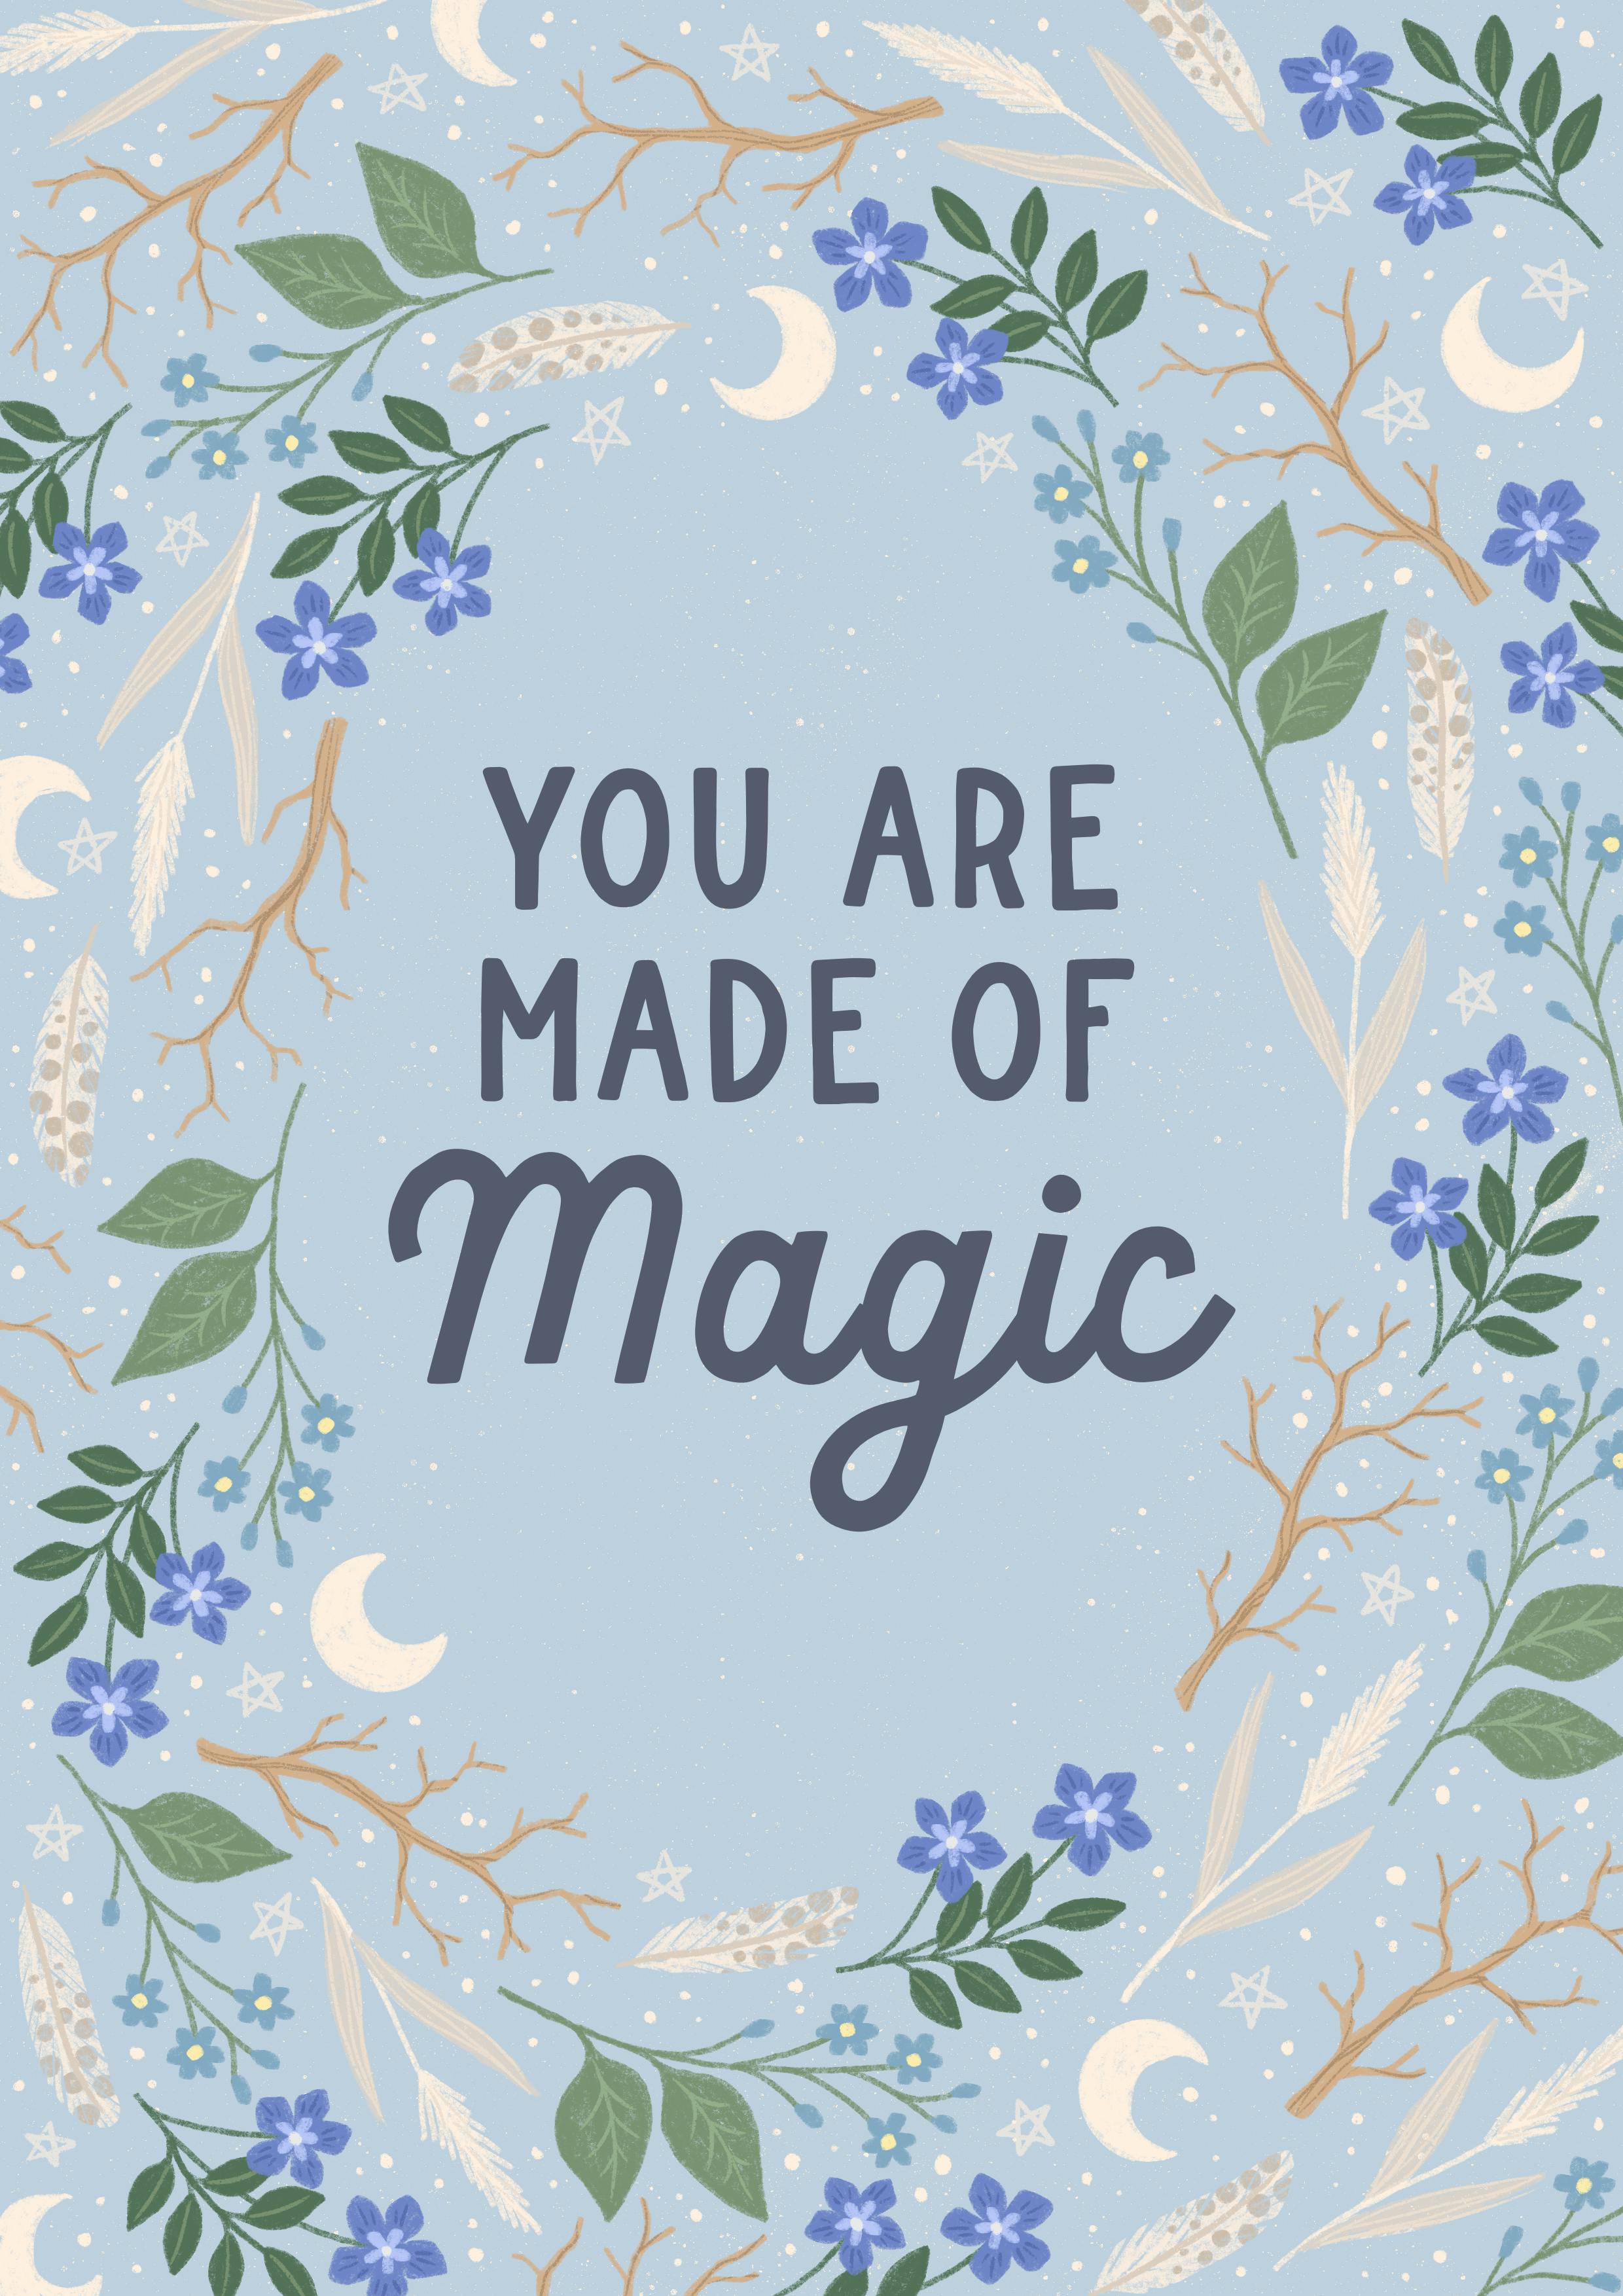 Floral poster with illustrated quote "You are made of magic"